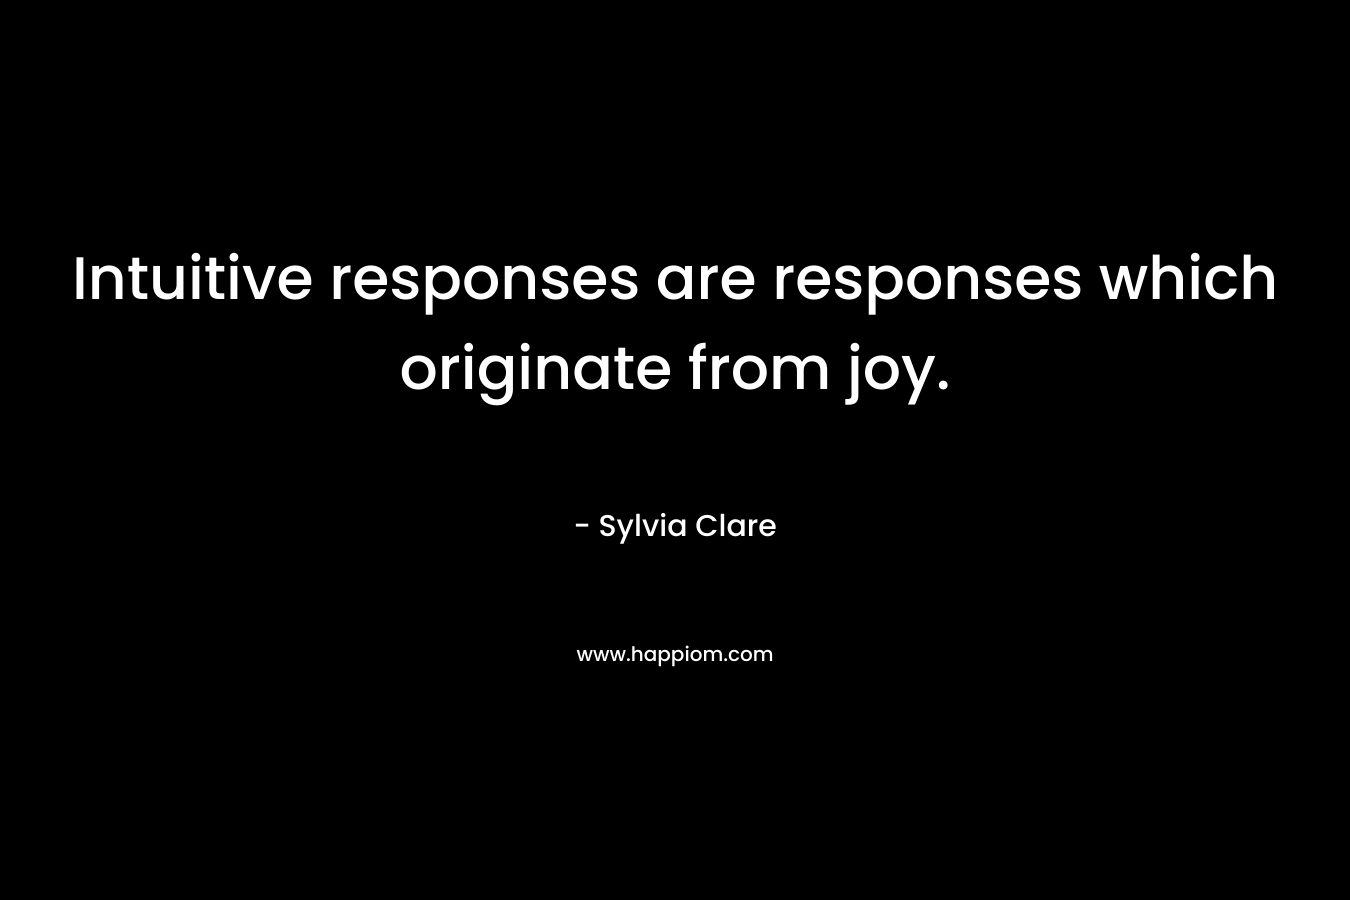 Intuitive responses are responses which originate from joy. – Sylvia Clare